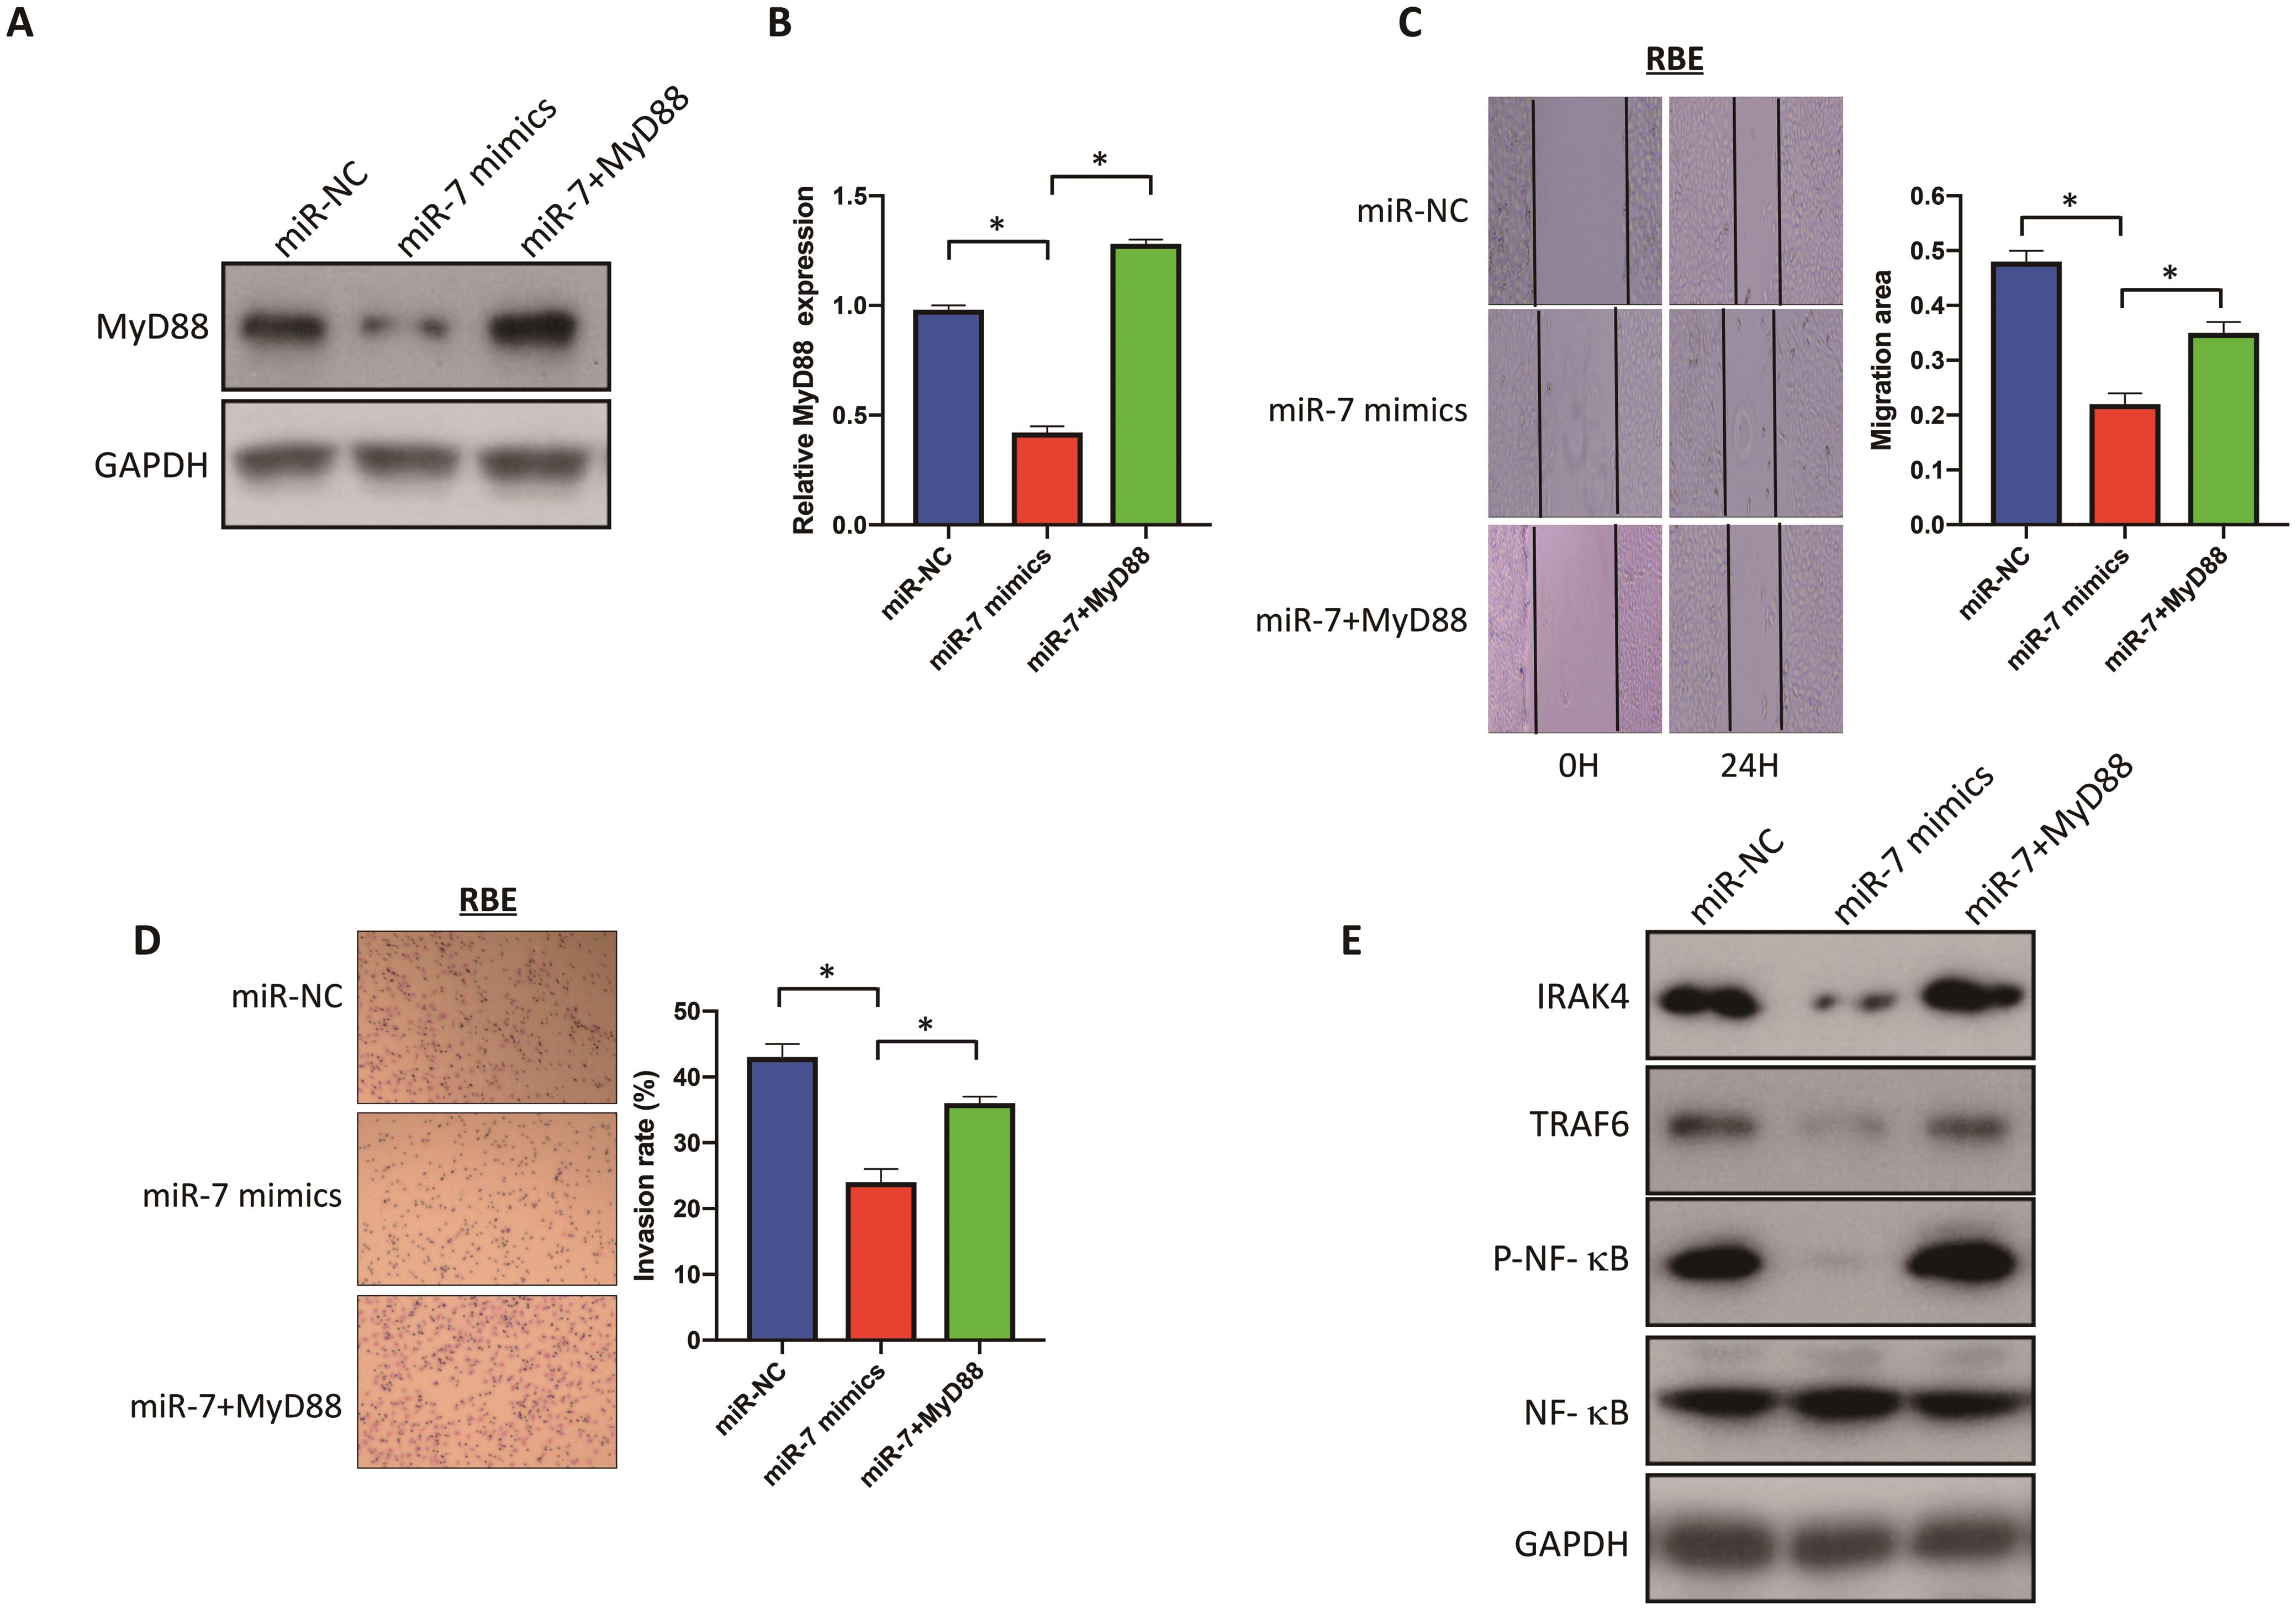 Overexpression of MyD88 counteracted the effects of miR-7-5p in RBE cells.